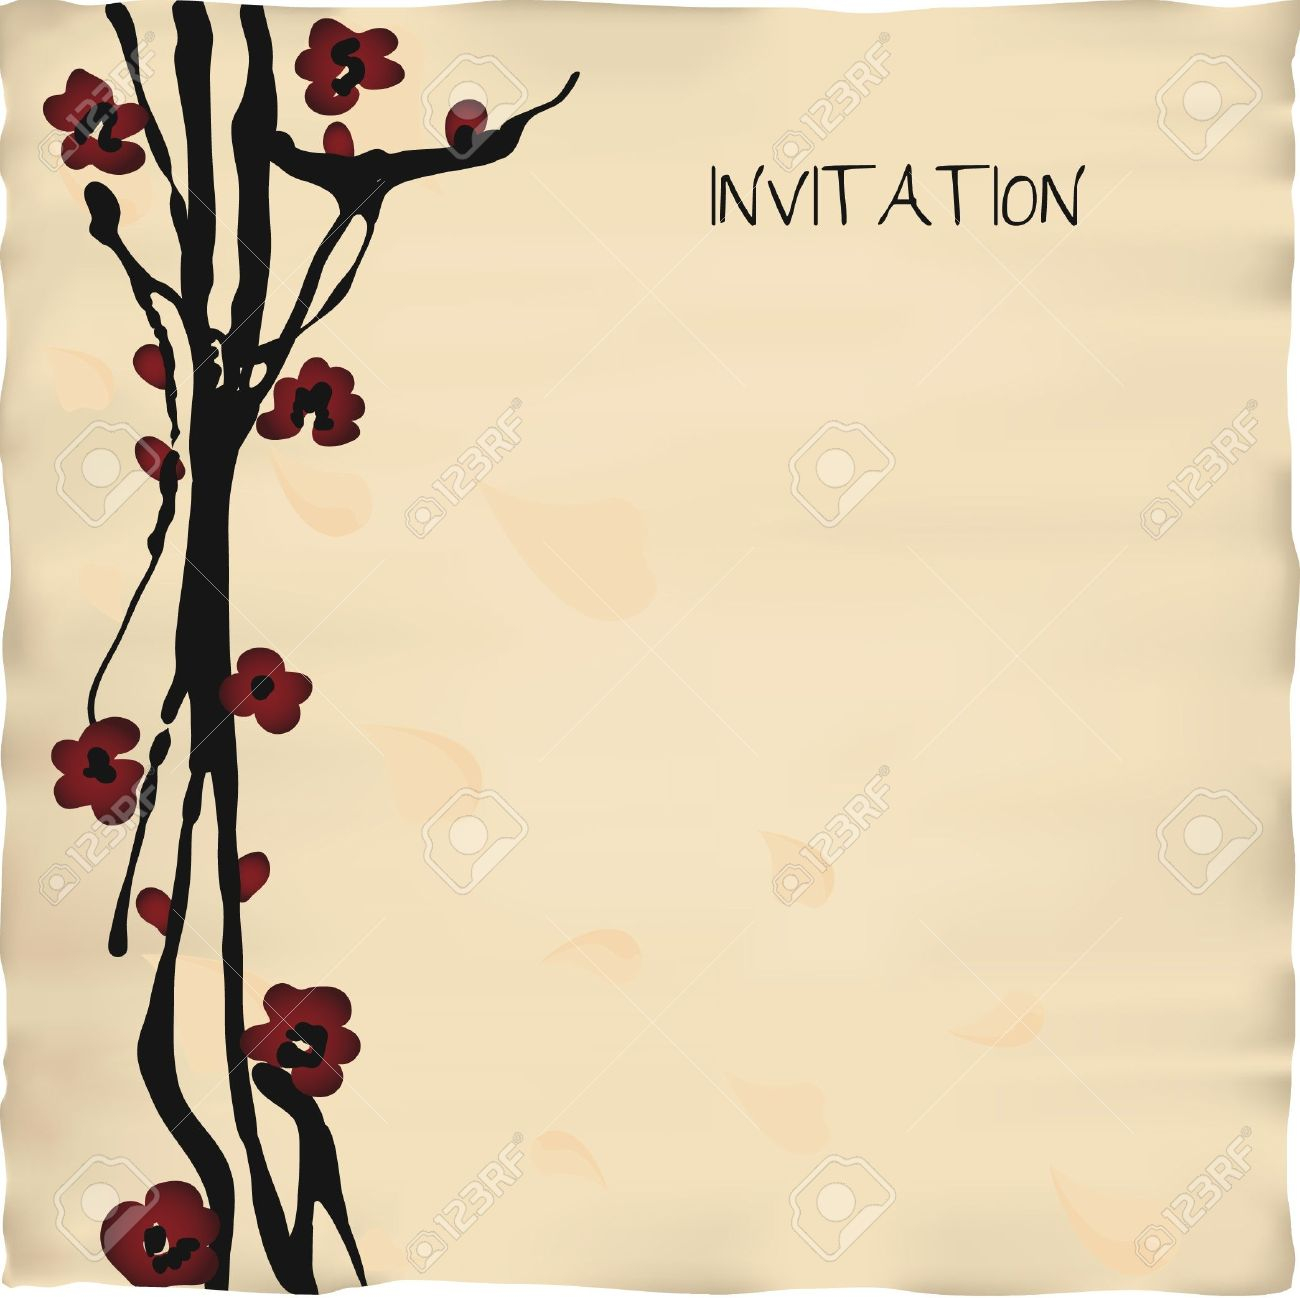 Japanese Or Chinese Style Invitation Card Template Royalty Free intended for size 1300 X 1298